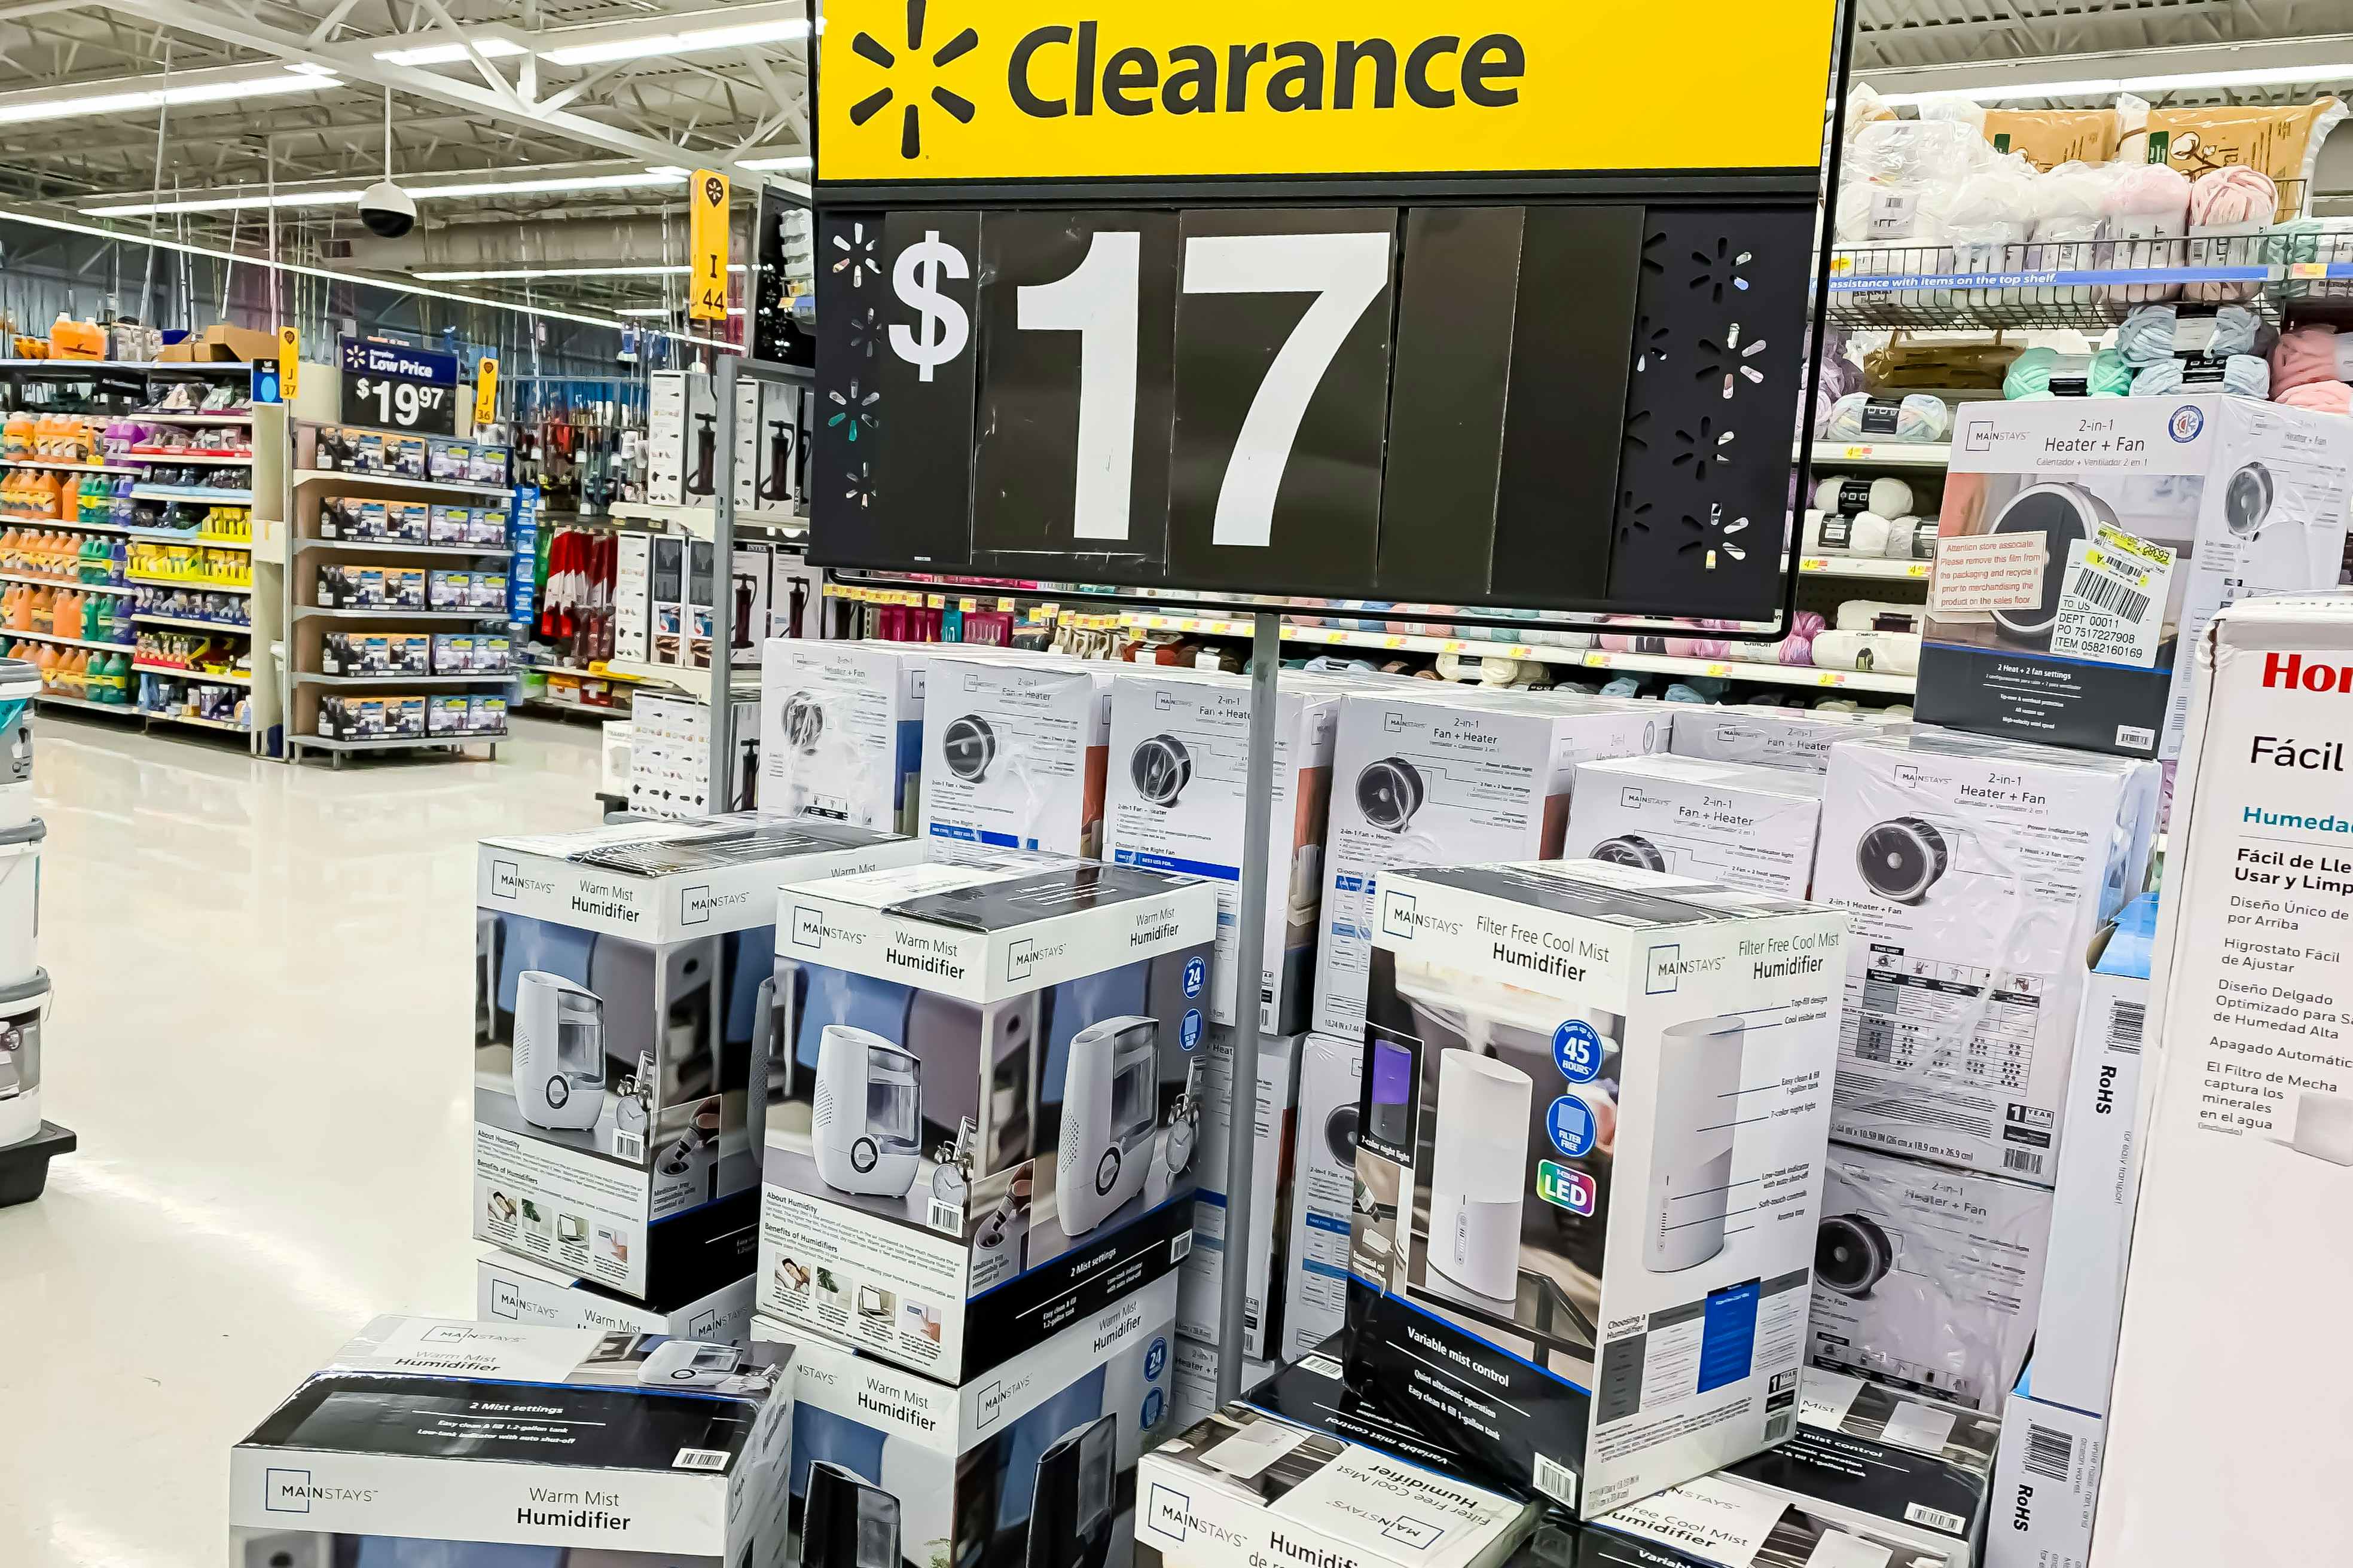 Humidifier Deals at Walmart — Clearance Prices Starting at Just $5